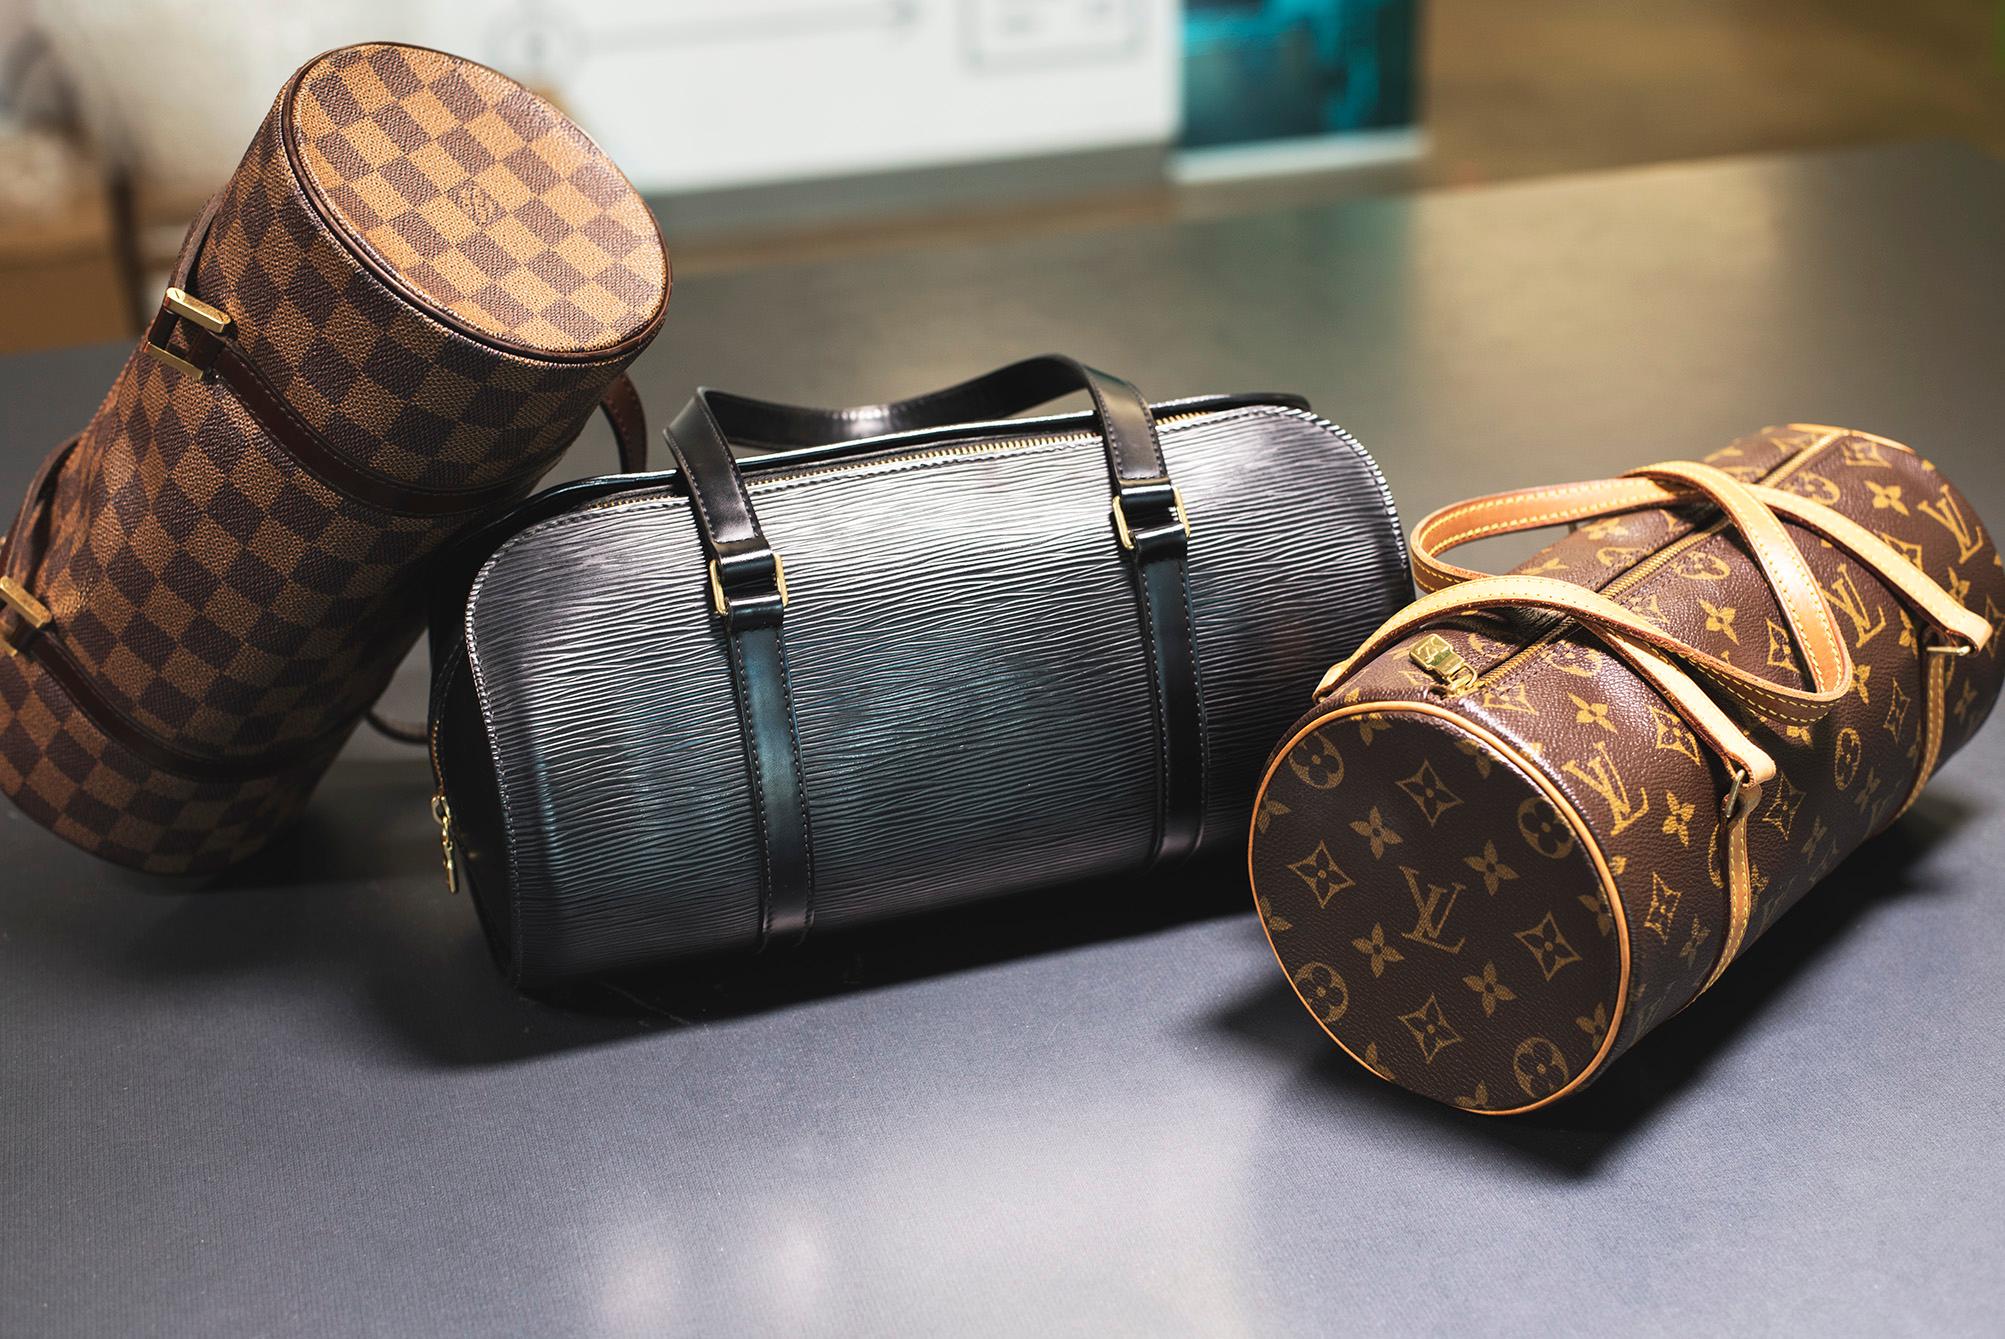 Virgil's Louis Vuitton Pre-Spring 2020 Collection is Here - StockX News